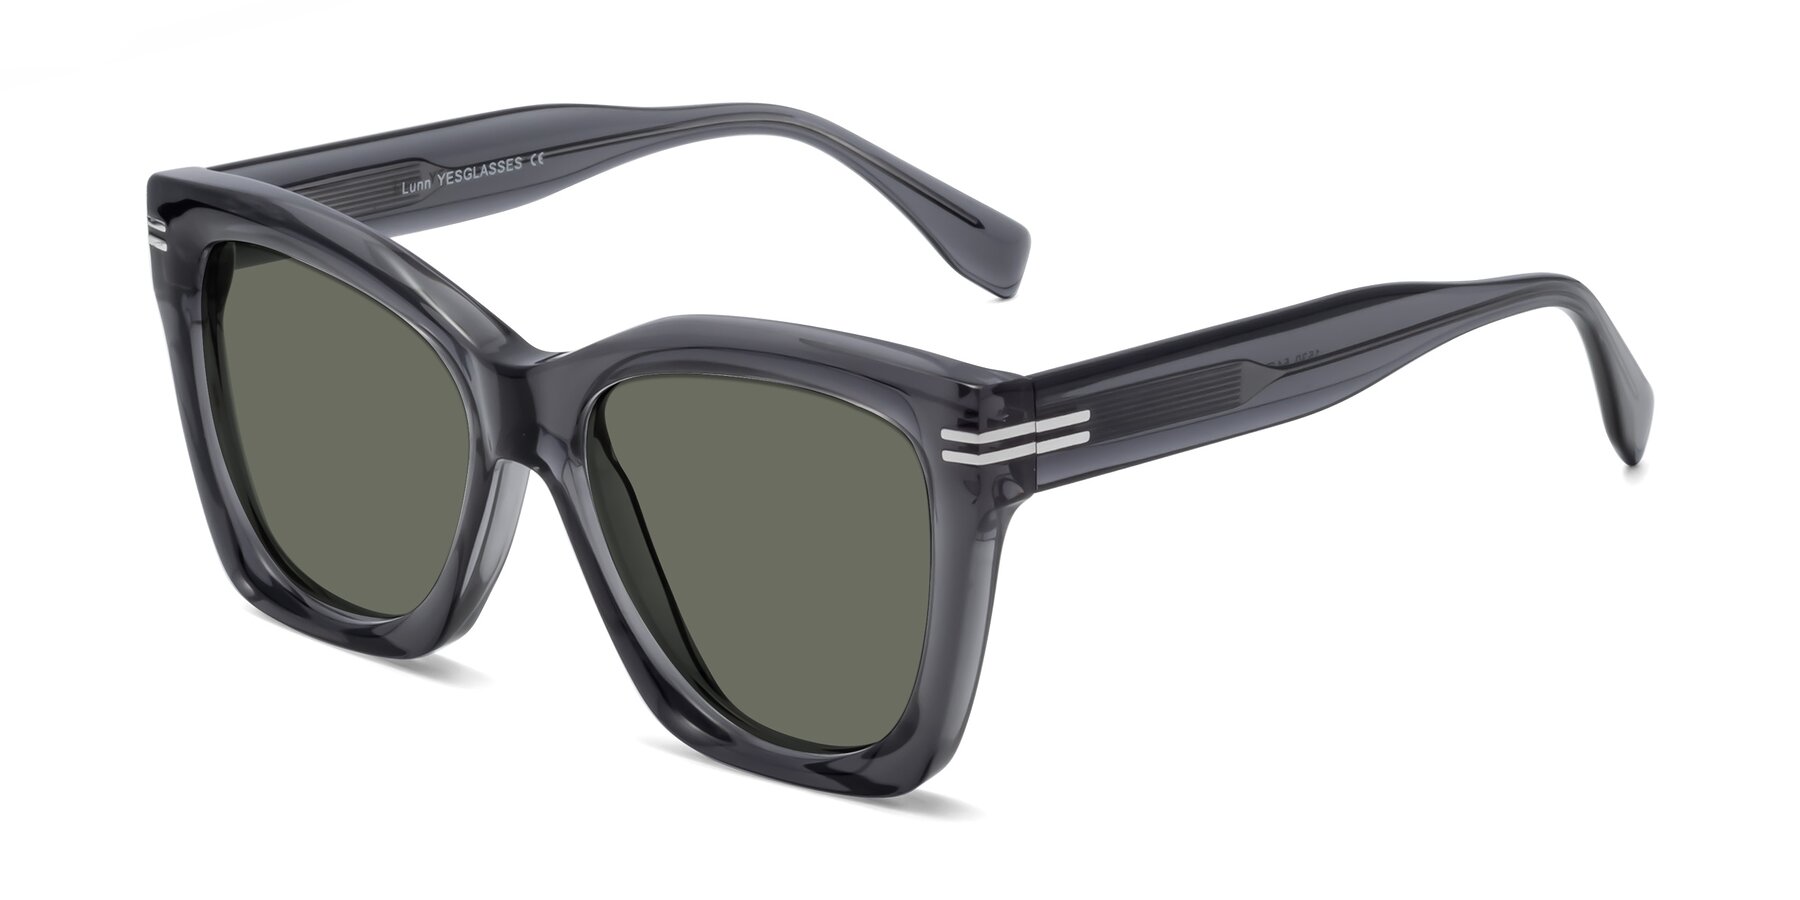 Angle of Lunn in Translucent Gray with Gray Polarized Lenses